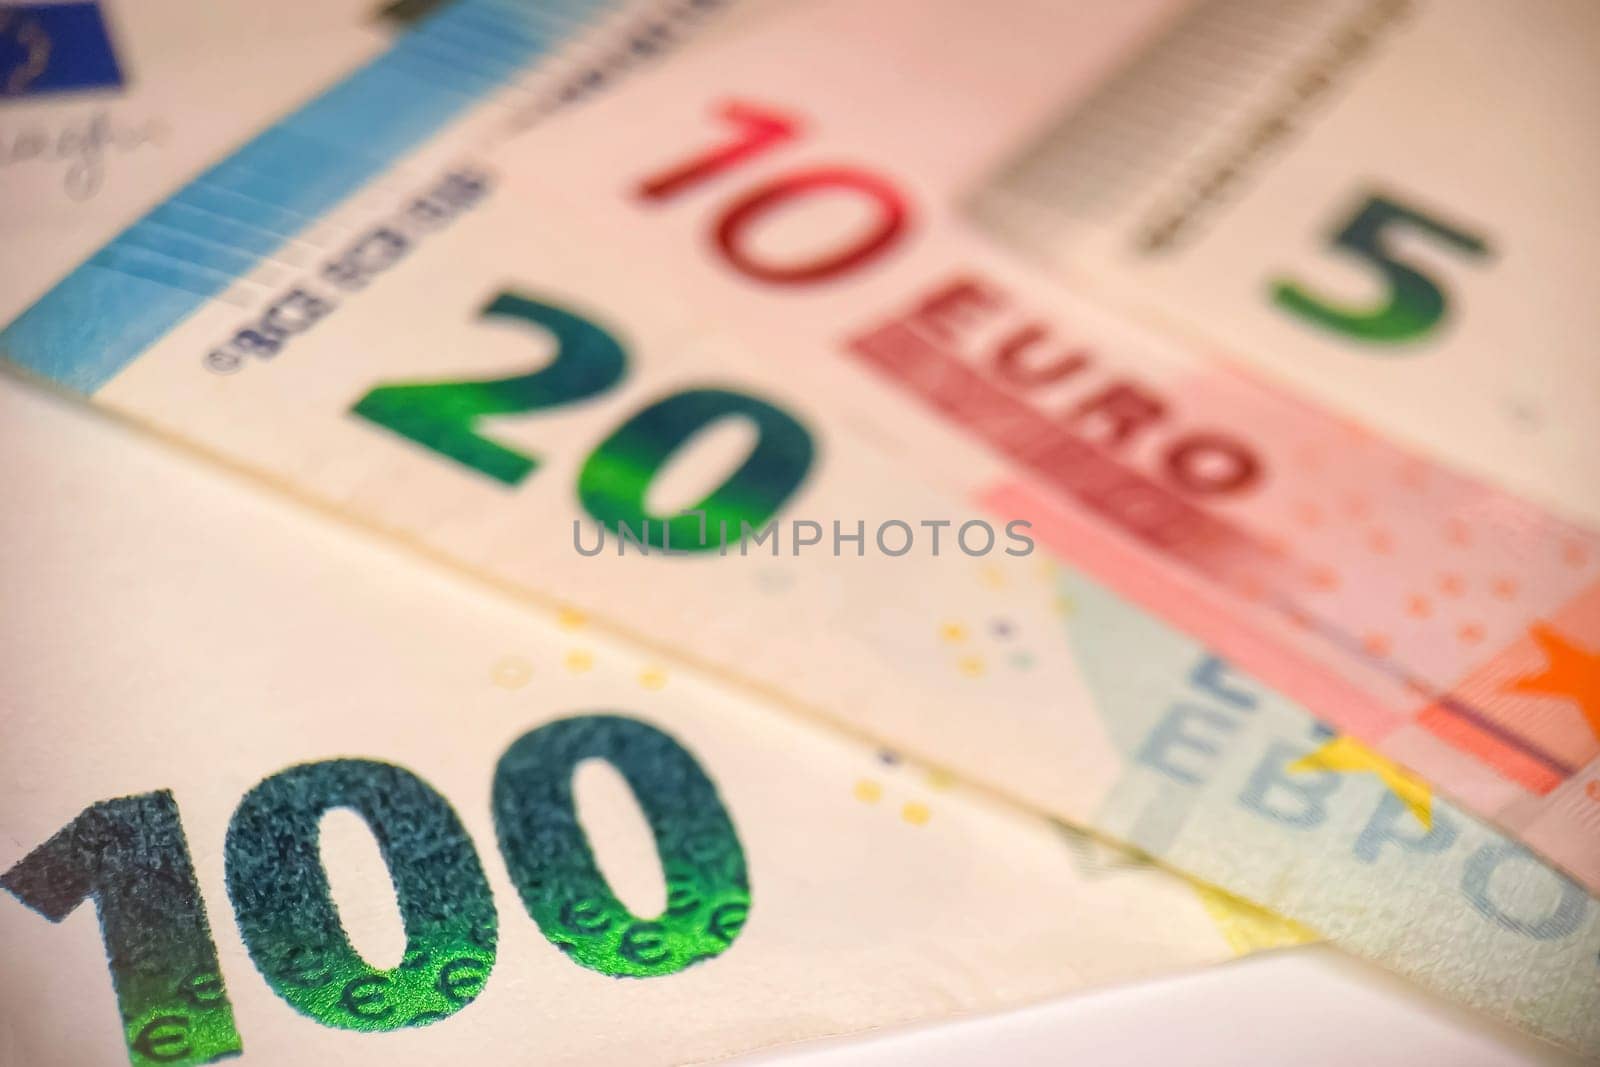 Euro banknotes. Euro, the common currency of the European Union. A financial instrument that plays an important role in the European economy.